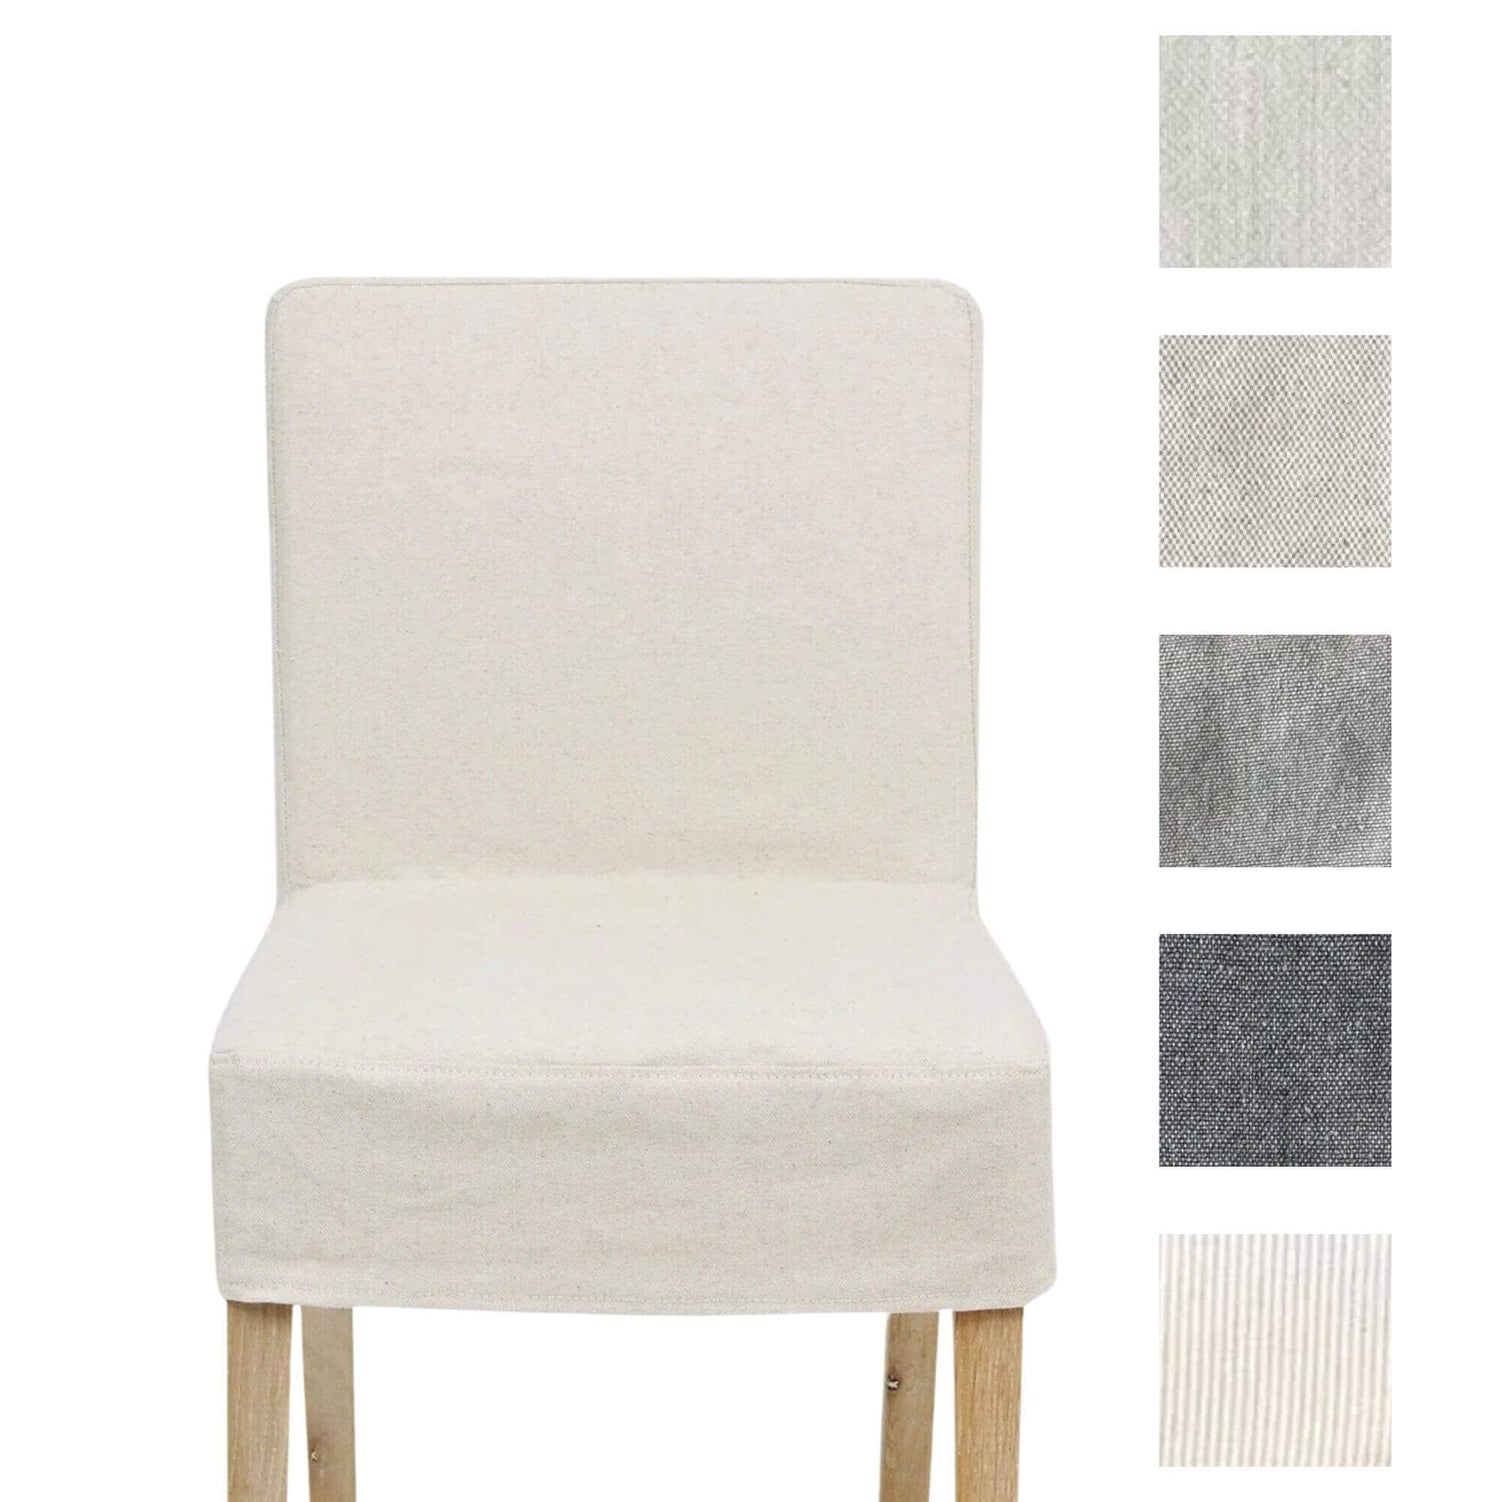 Collaroy Low Back Chair Cover Dining Furniture Beachwood Designs Salt &amp; Pepper Linen Cotton 